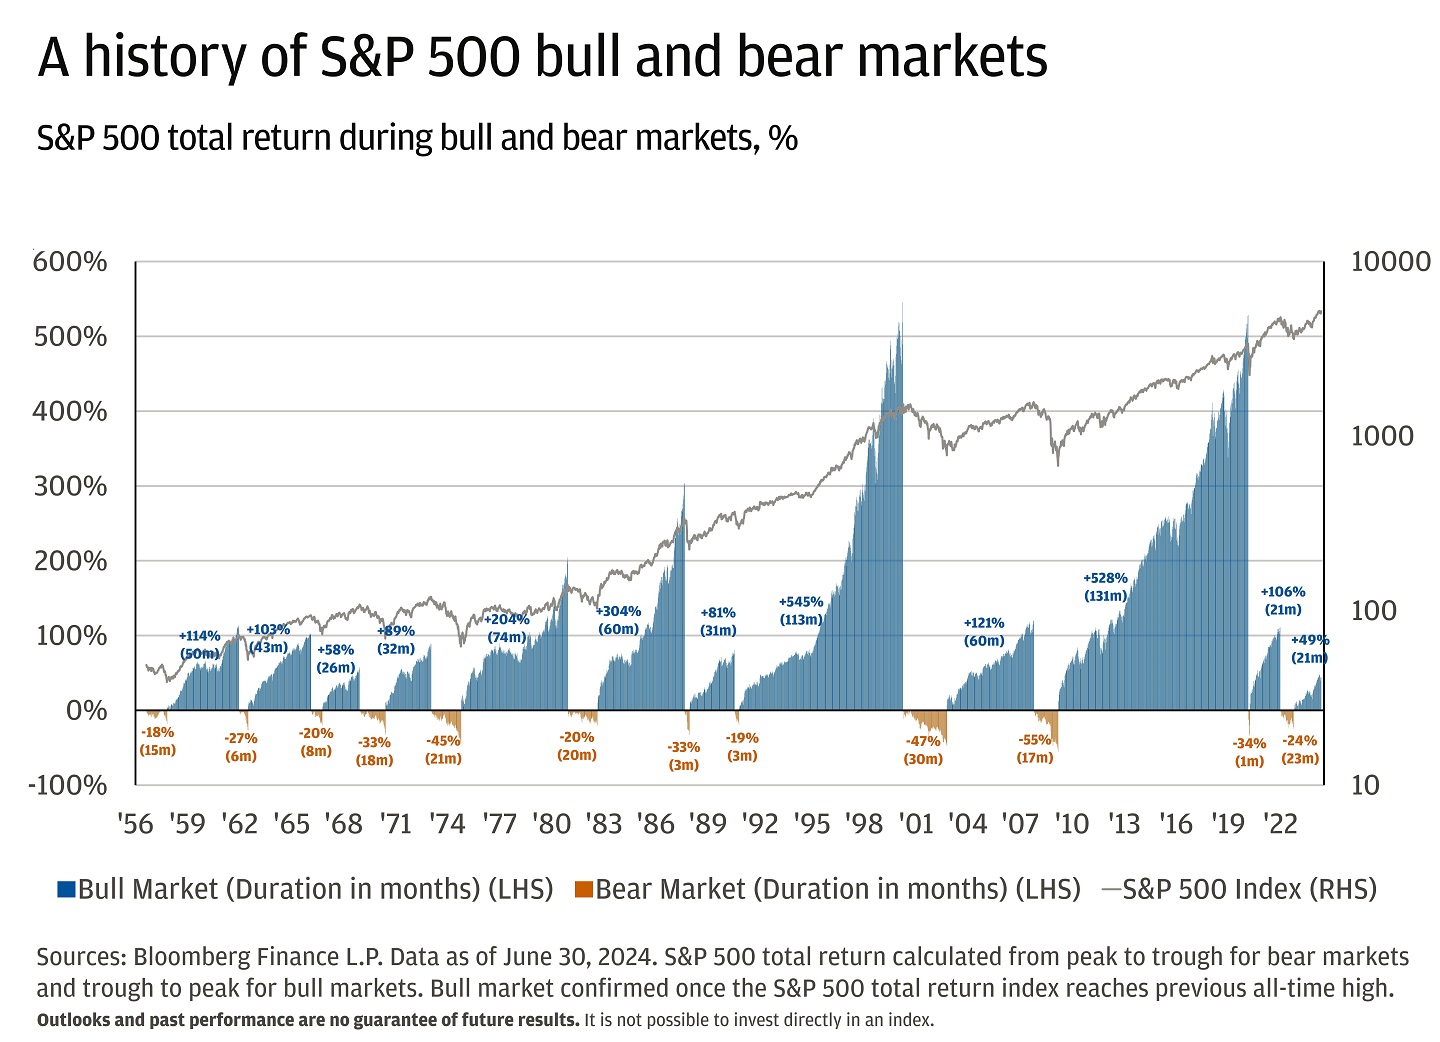 Chart showing the duration and returns of bull and bear markets from 1956 to 2024.